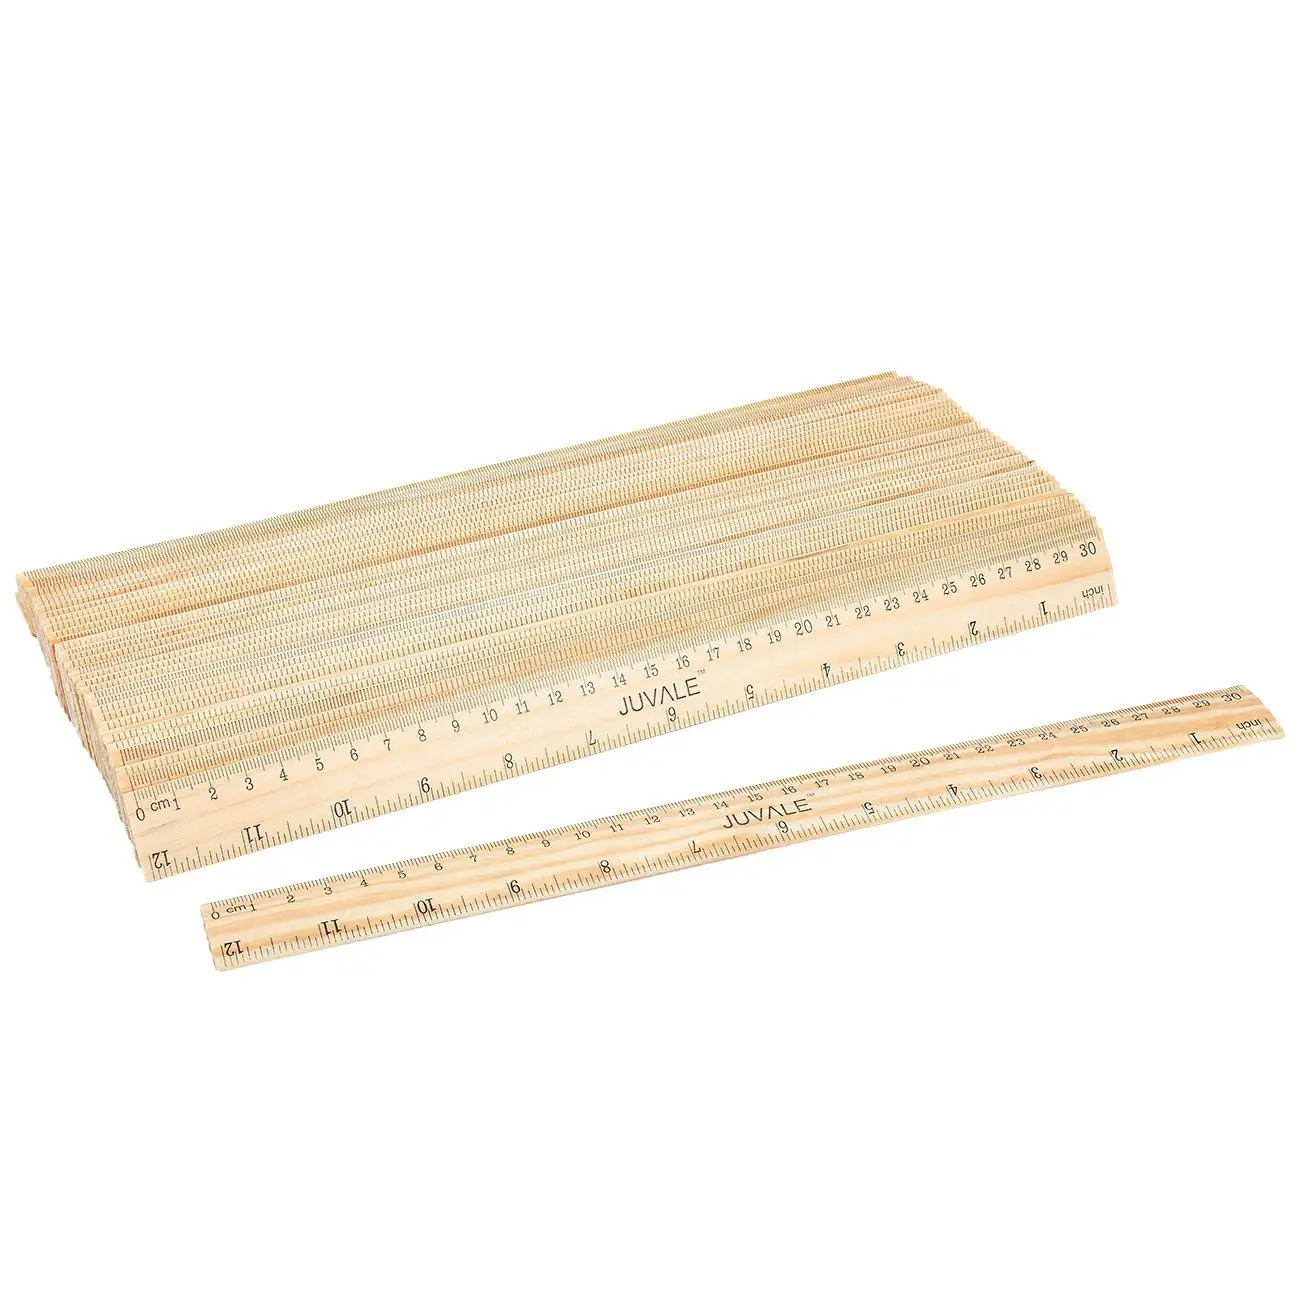 12 Inch and 30 CM SODIAL 20 PCS Pack Wood Ruler for School //Office //Student Wooden Measuring Ruler With 2 scale